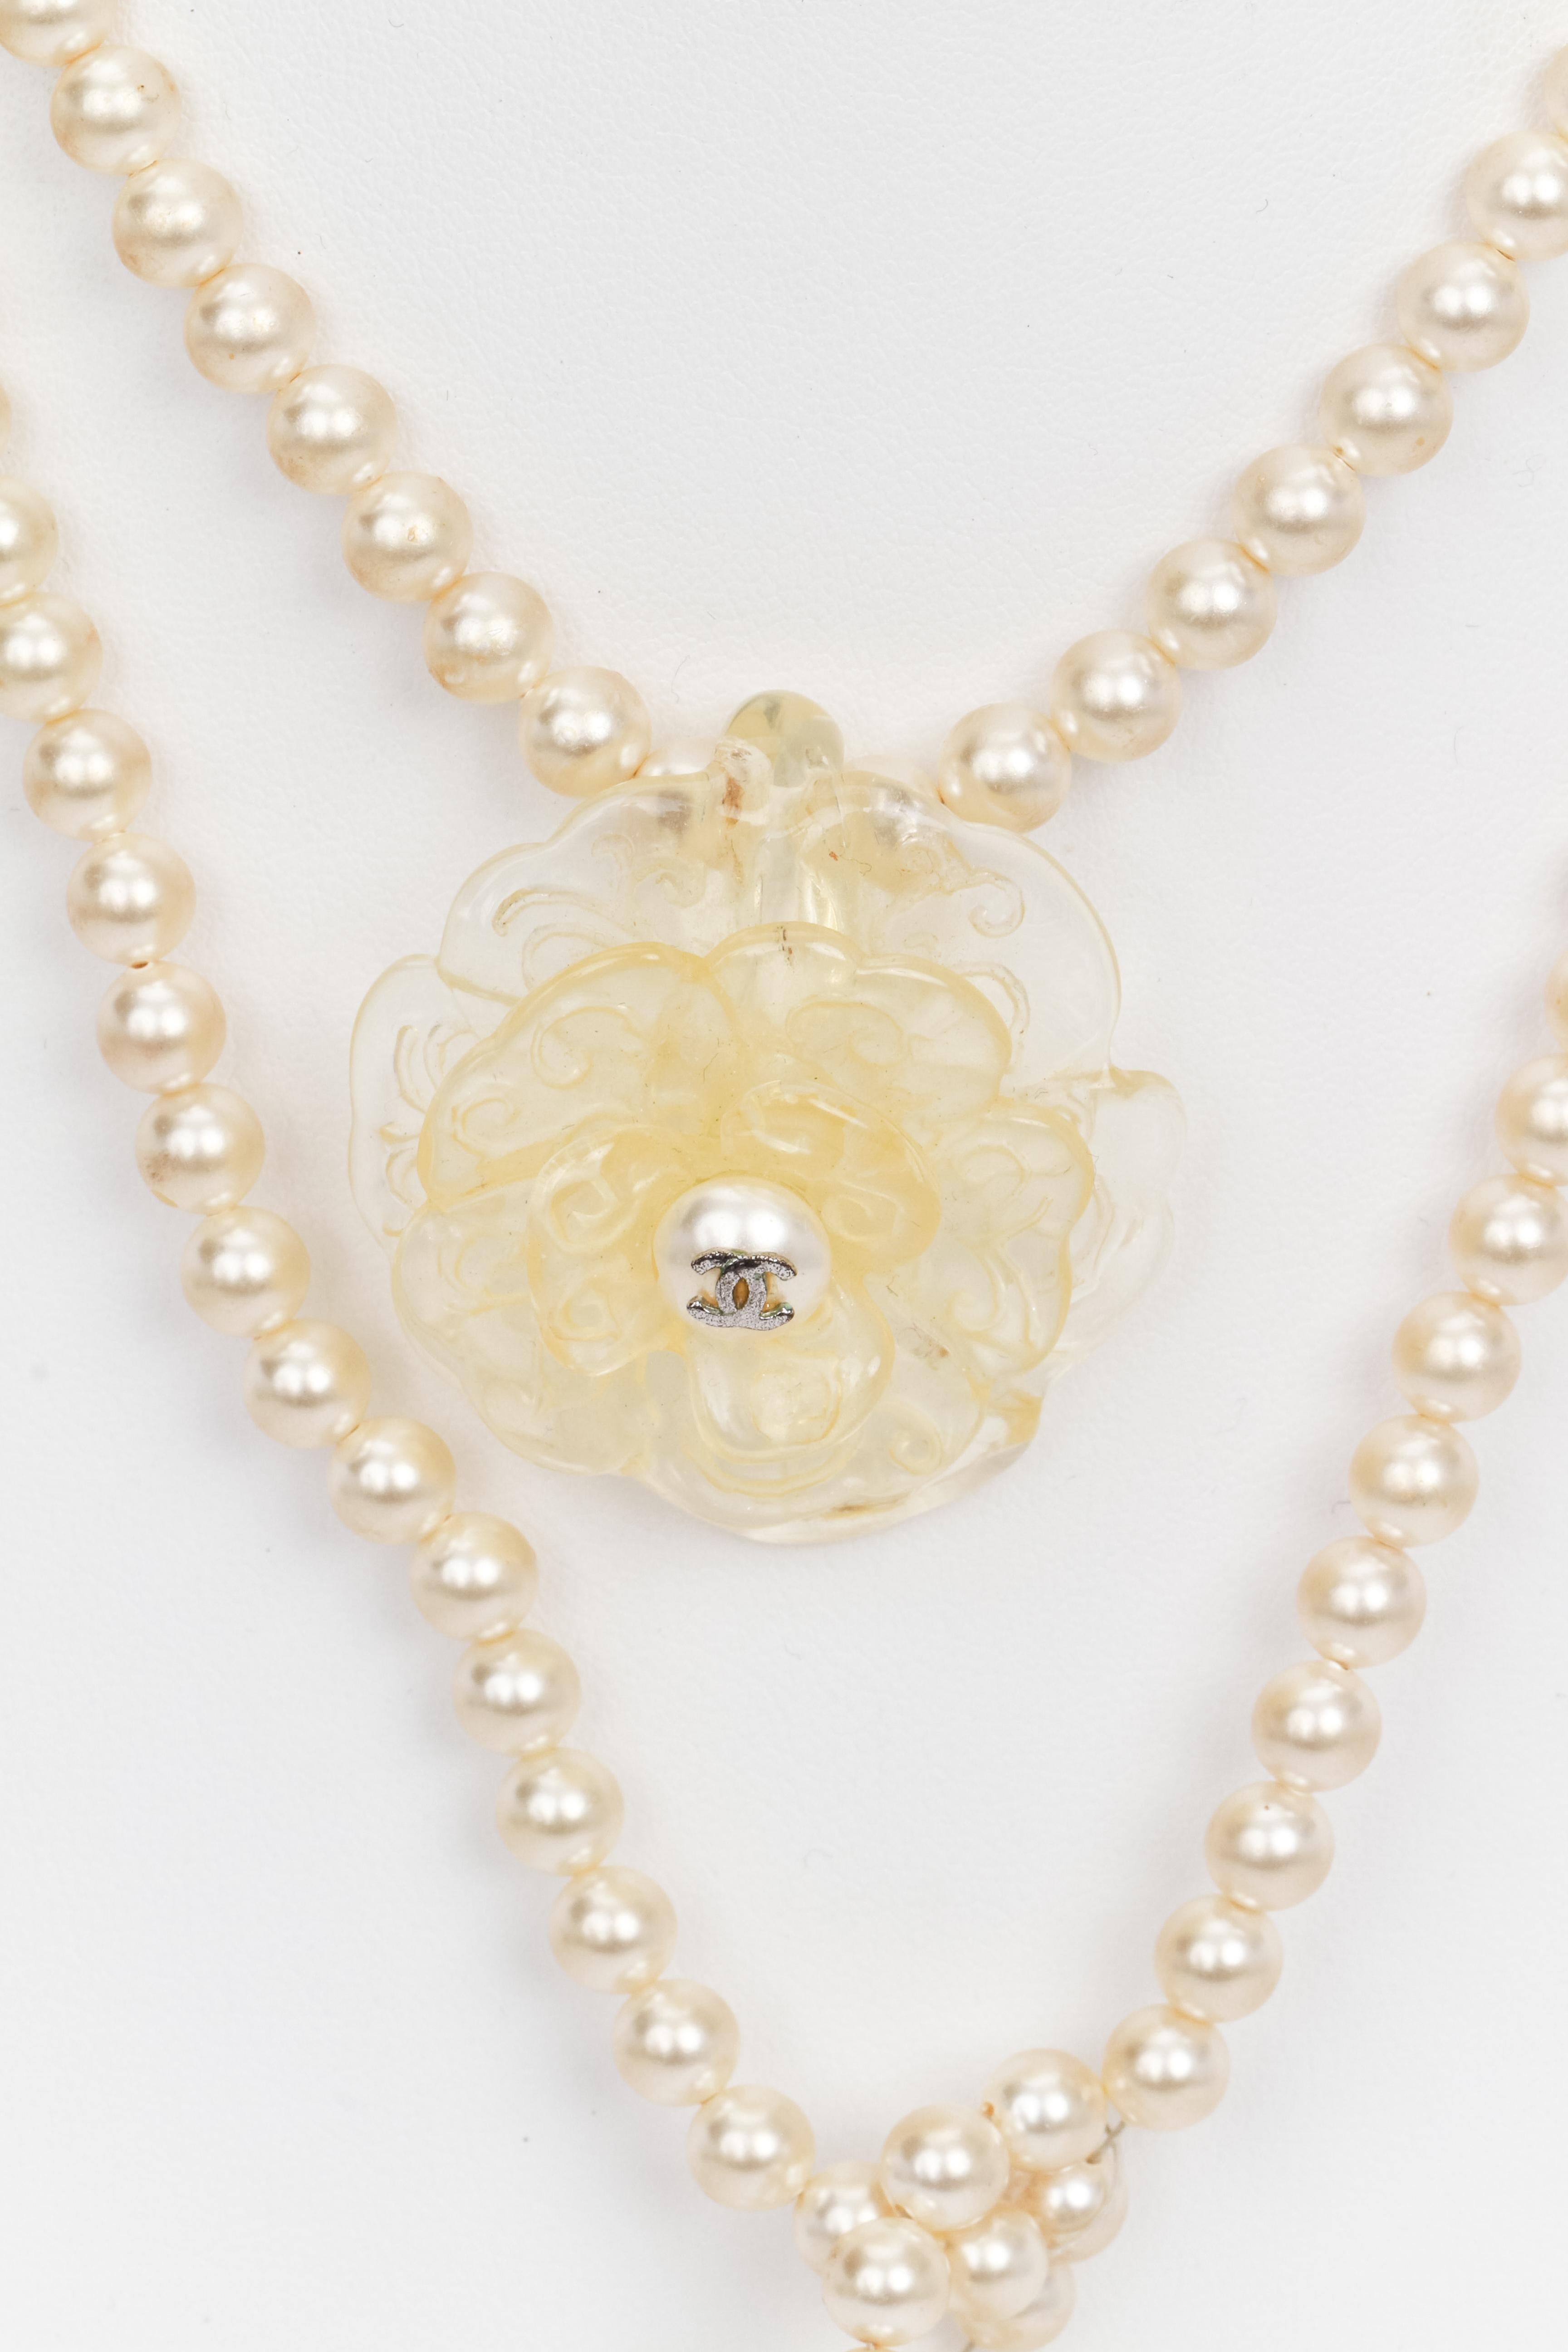 Chanel long open necklace with pearls, centering a lucite camellia flower with pearl and CC logo. Lucite leaves finials at both ends. Create your own way to wear it. 1990s